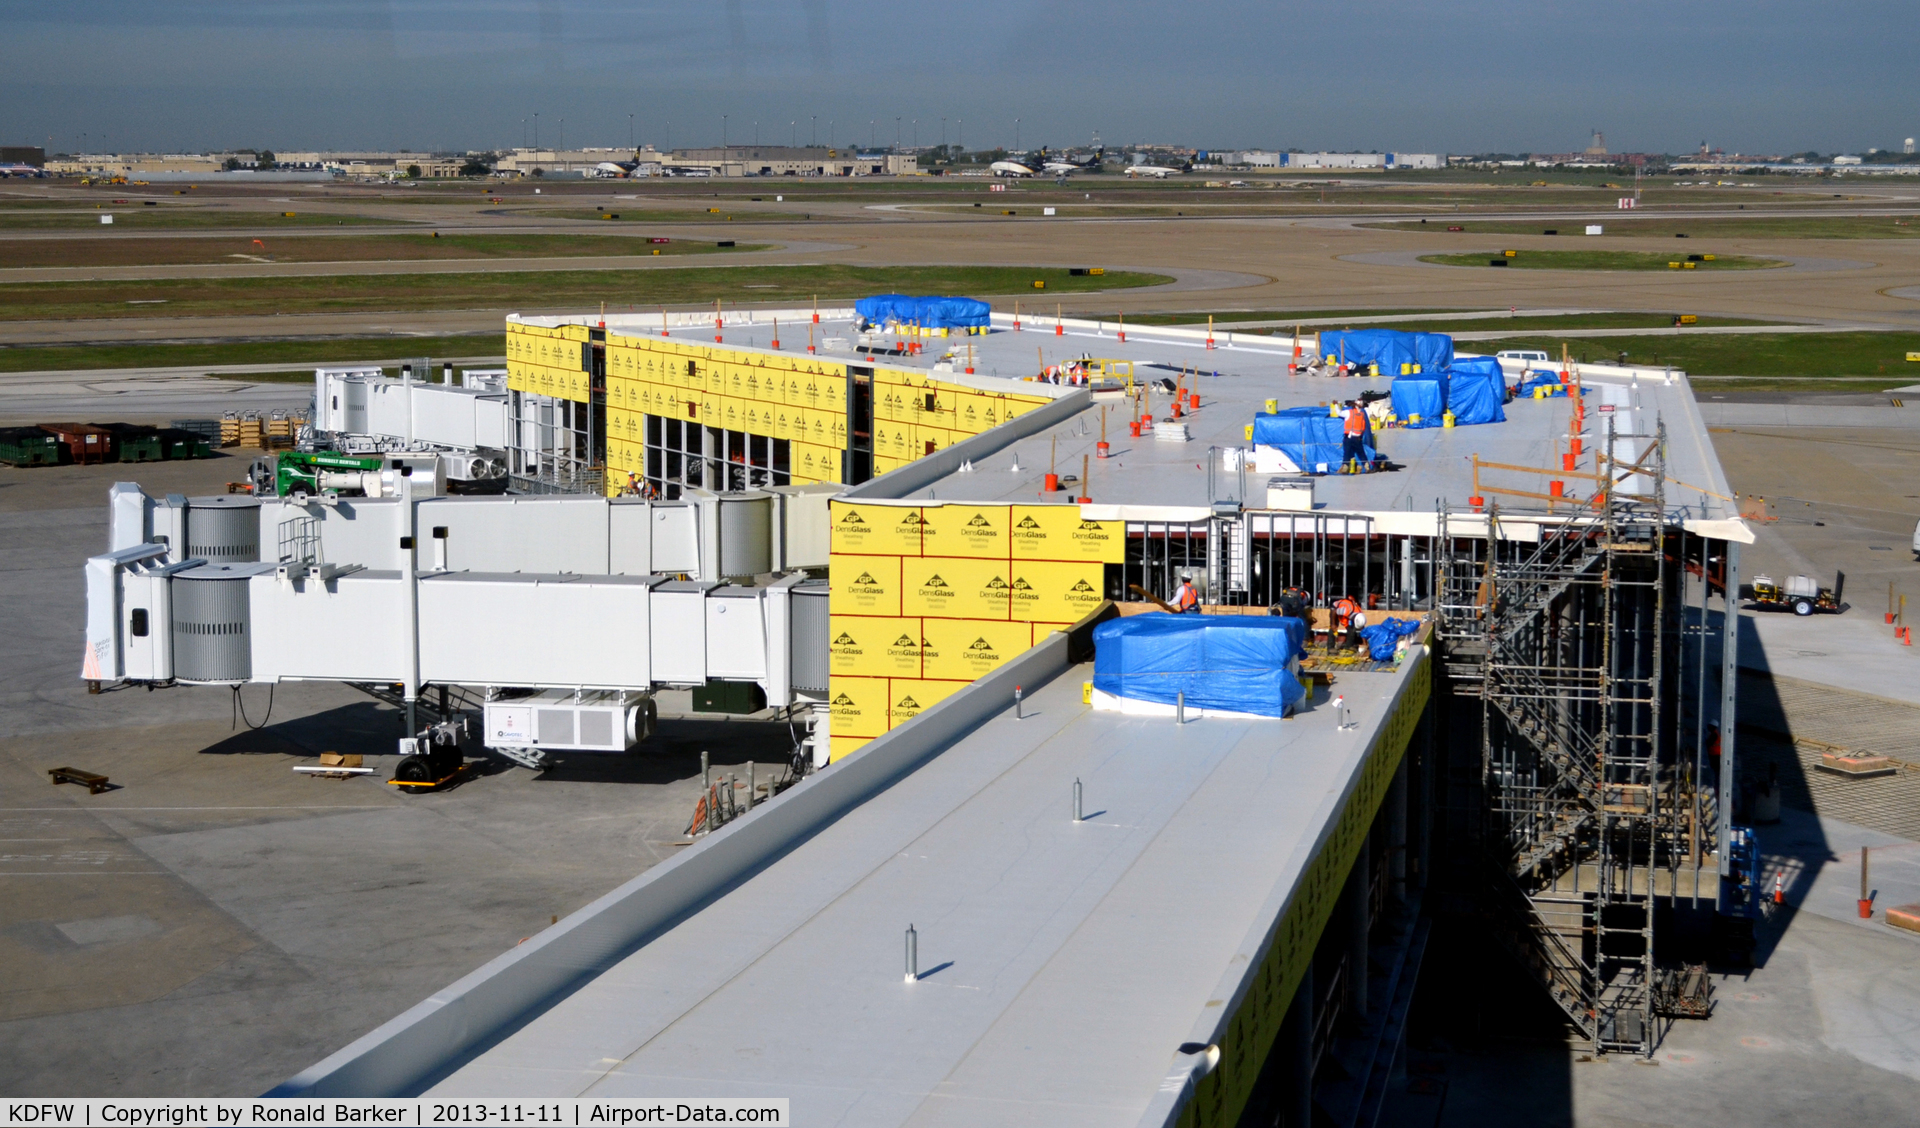 Dallas/fort Worth International Airport (DFW) - New gate construction at DFW